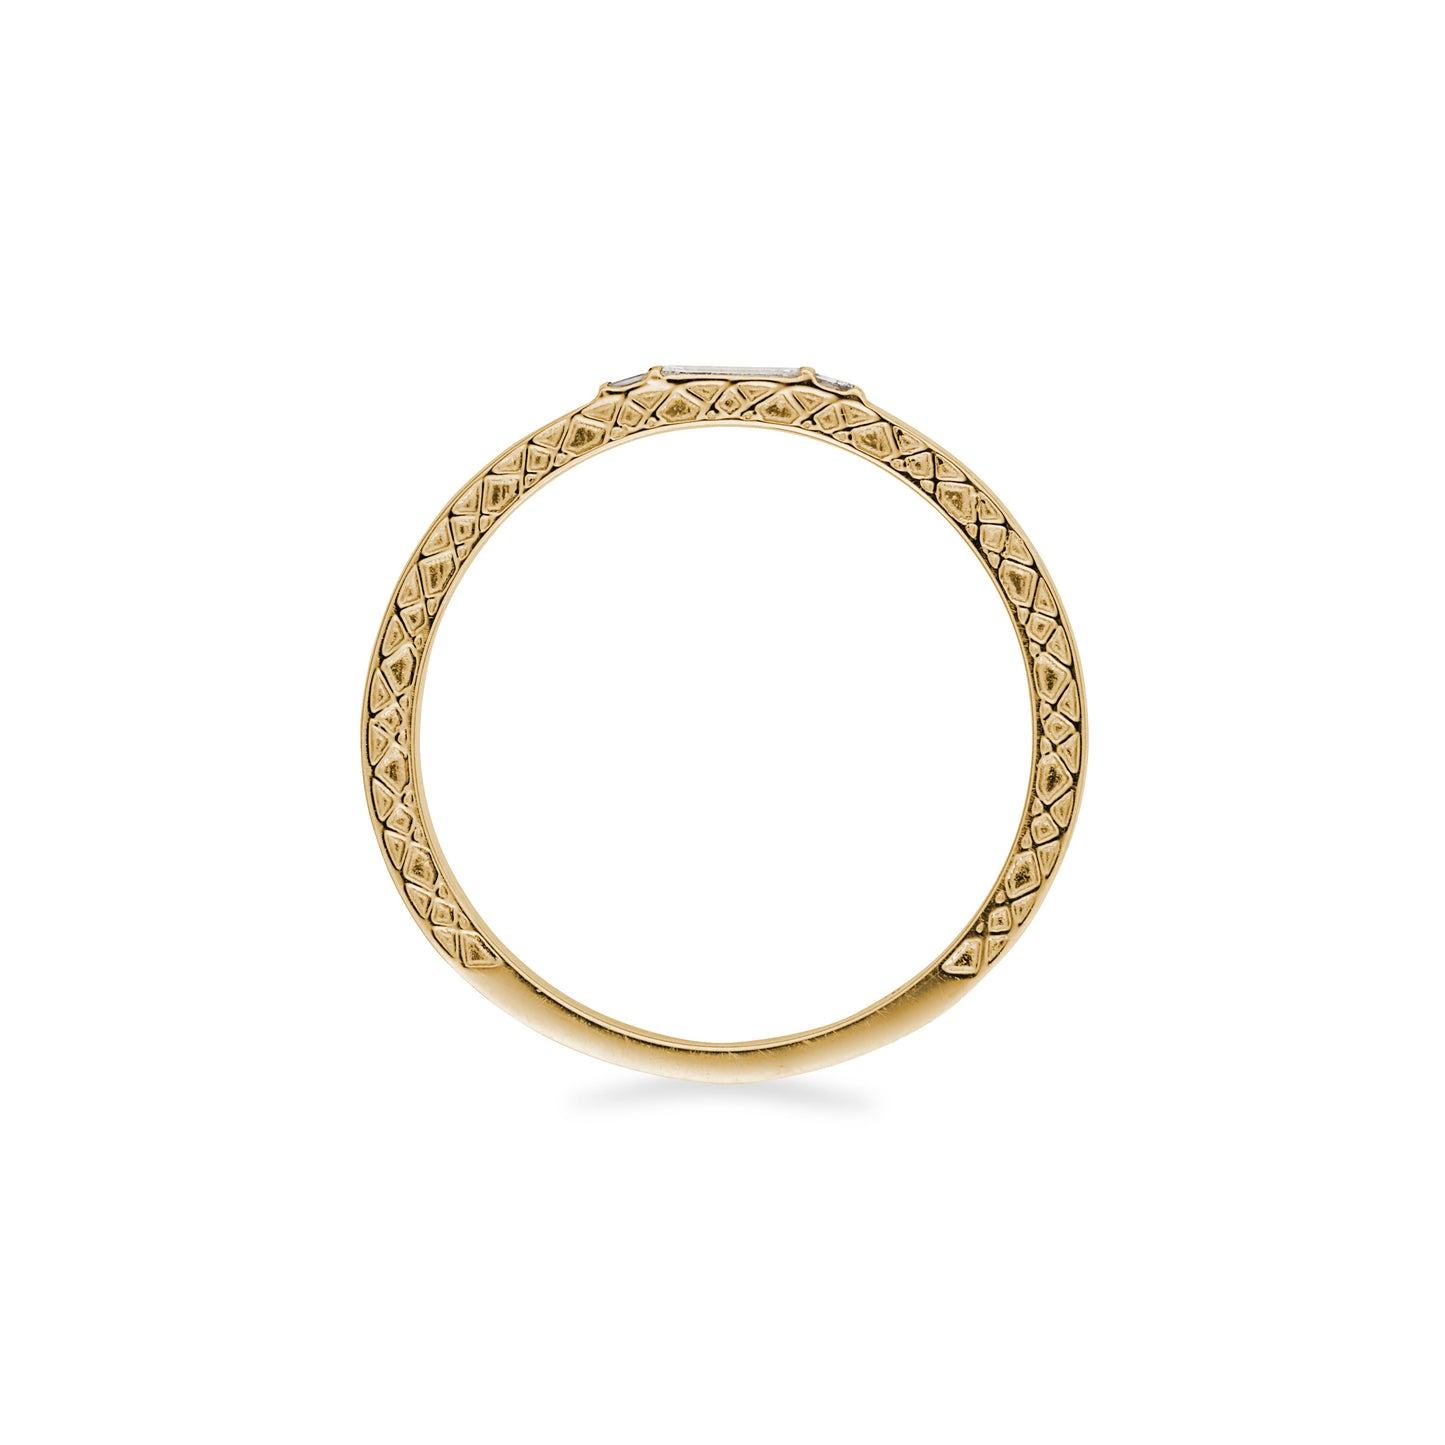 Side view 14k yellow gold band with textured side detail and baguette diamonds on white background.